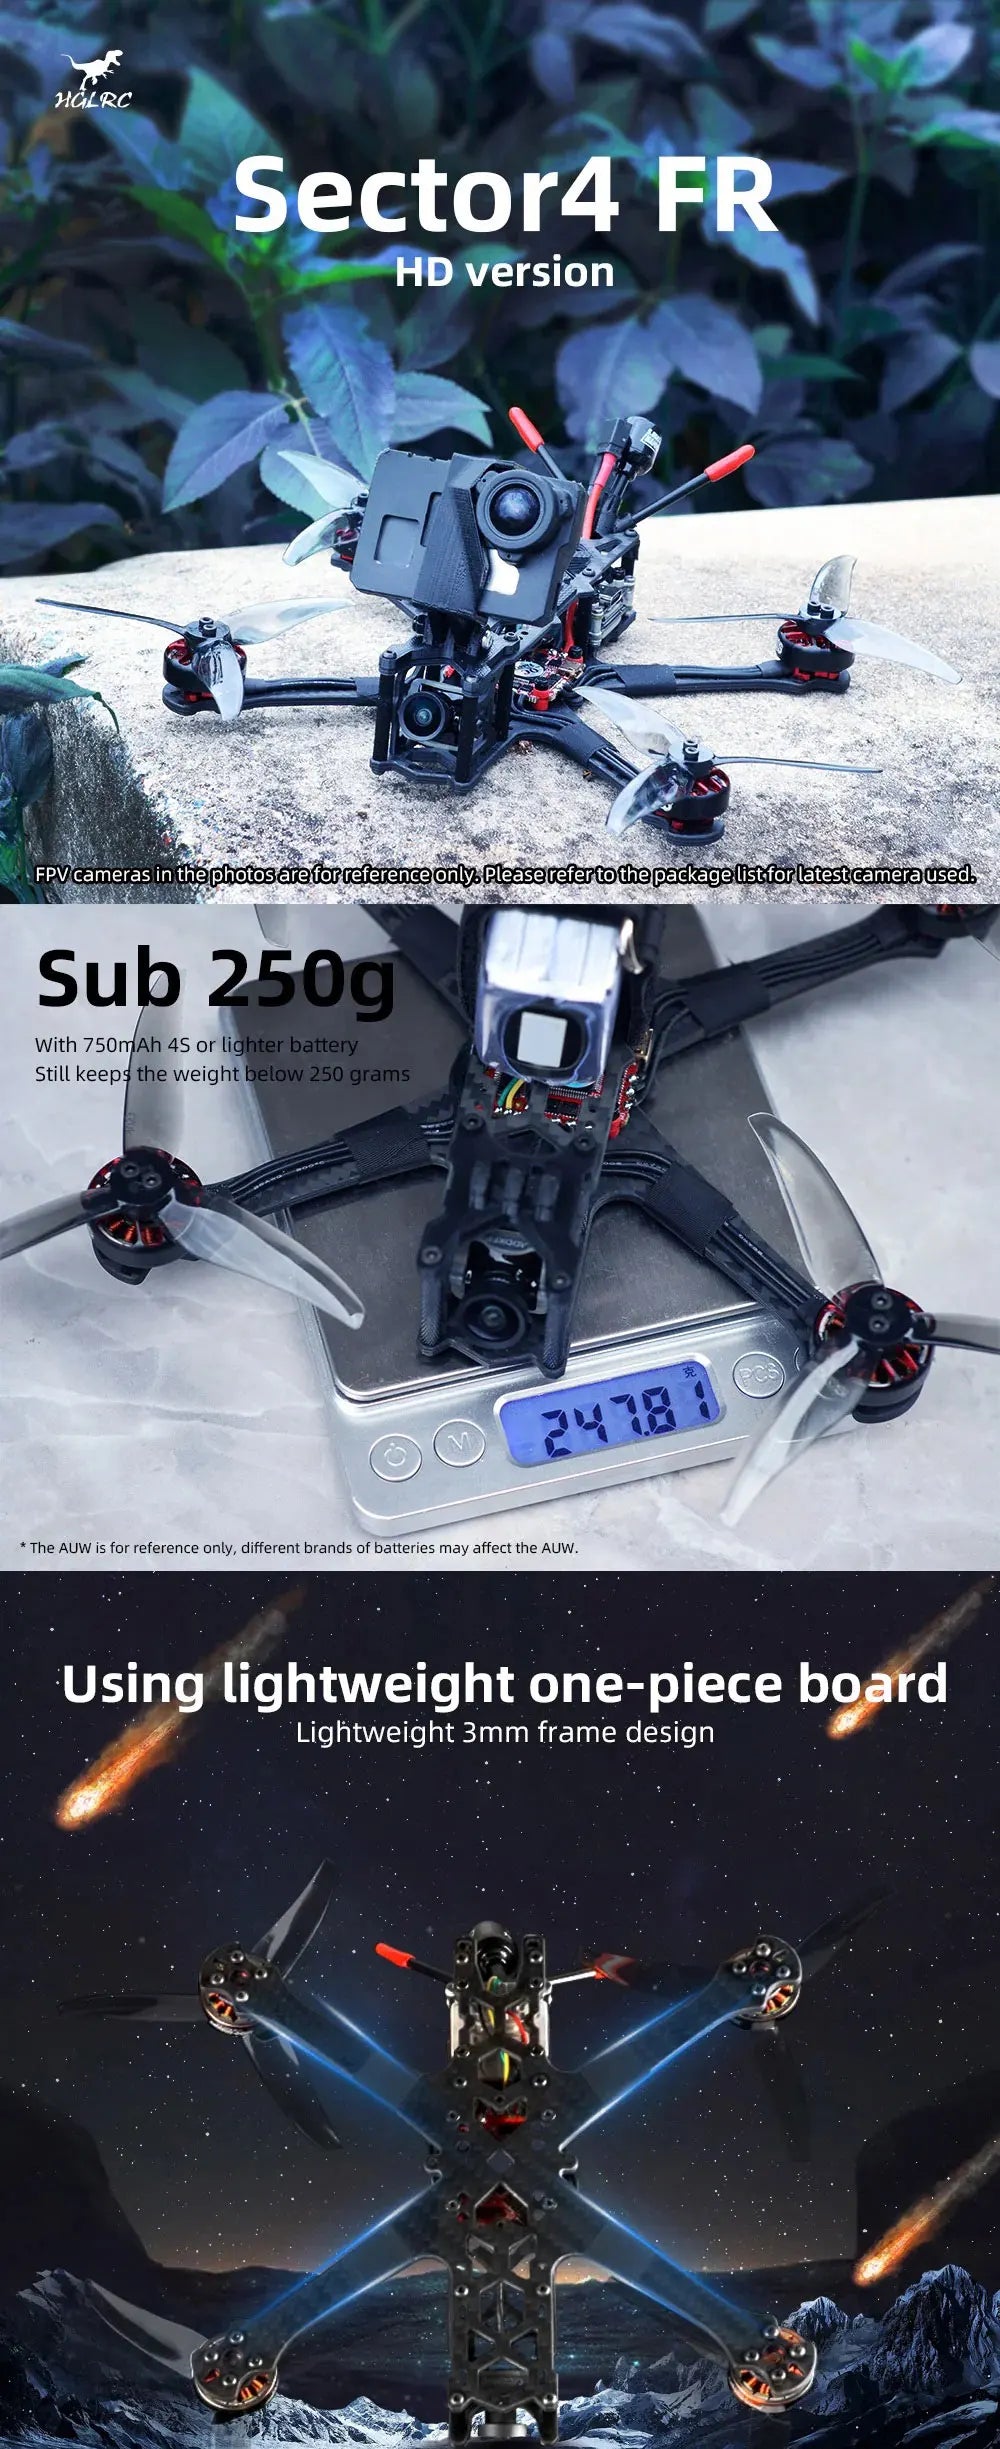 HGLRC Sector 4 FR Sub250g Freestyle FPV Drone, MGLRC Sector4 FR HD version FPV cameras in thephotosarefor